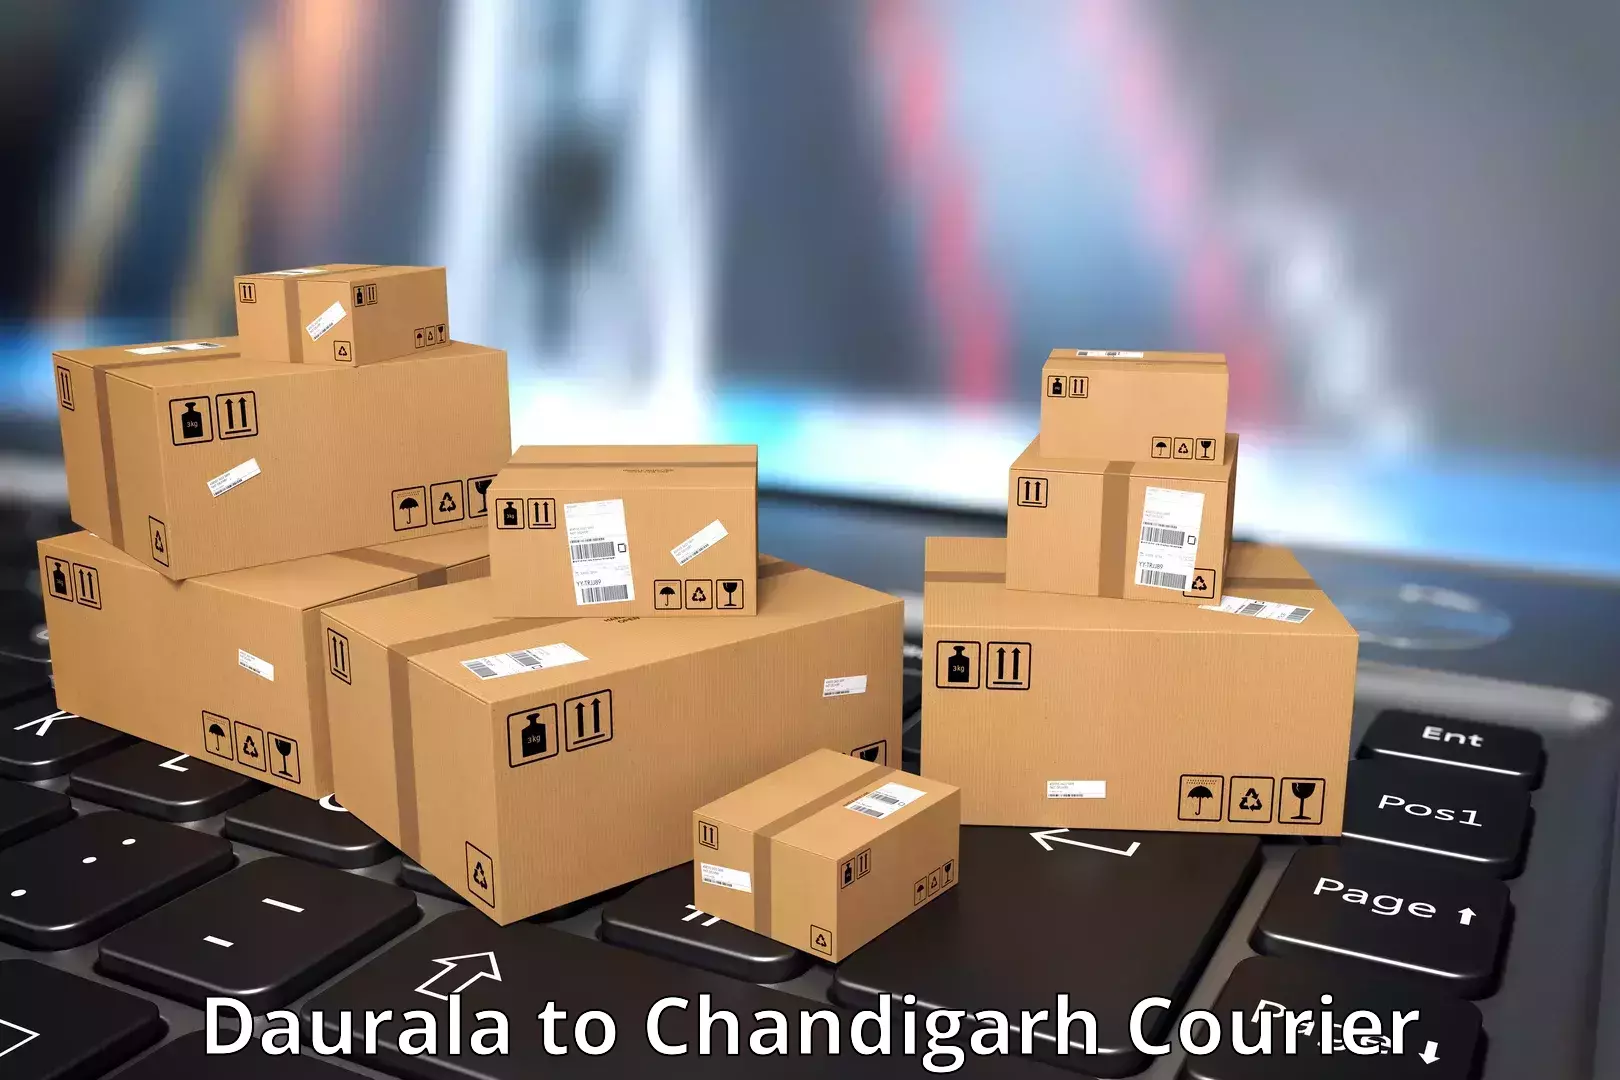 Same-day delivery solutions Daurala to Chandigarh